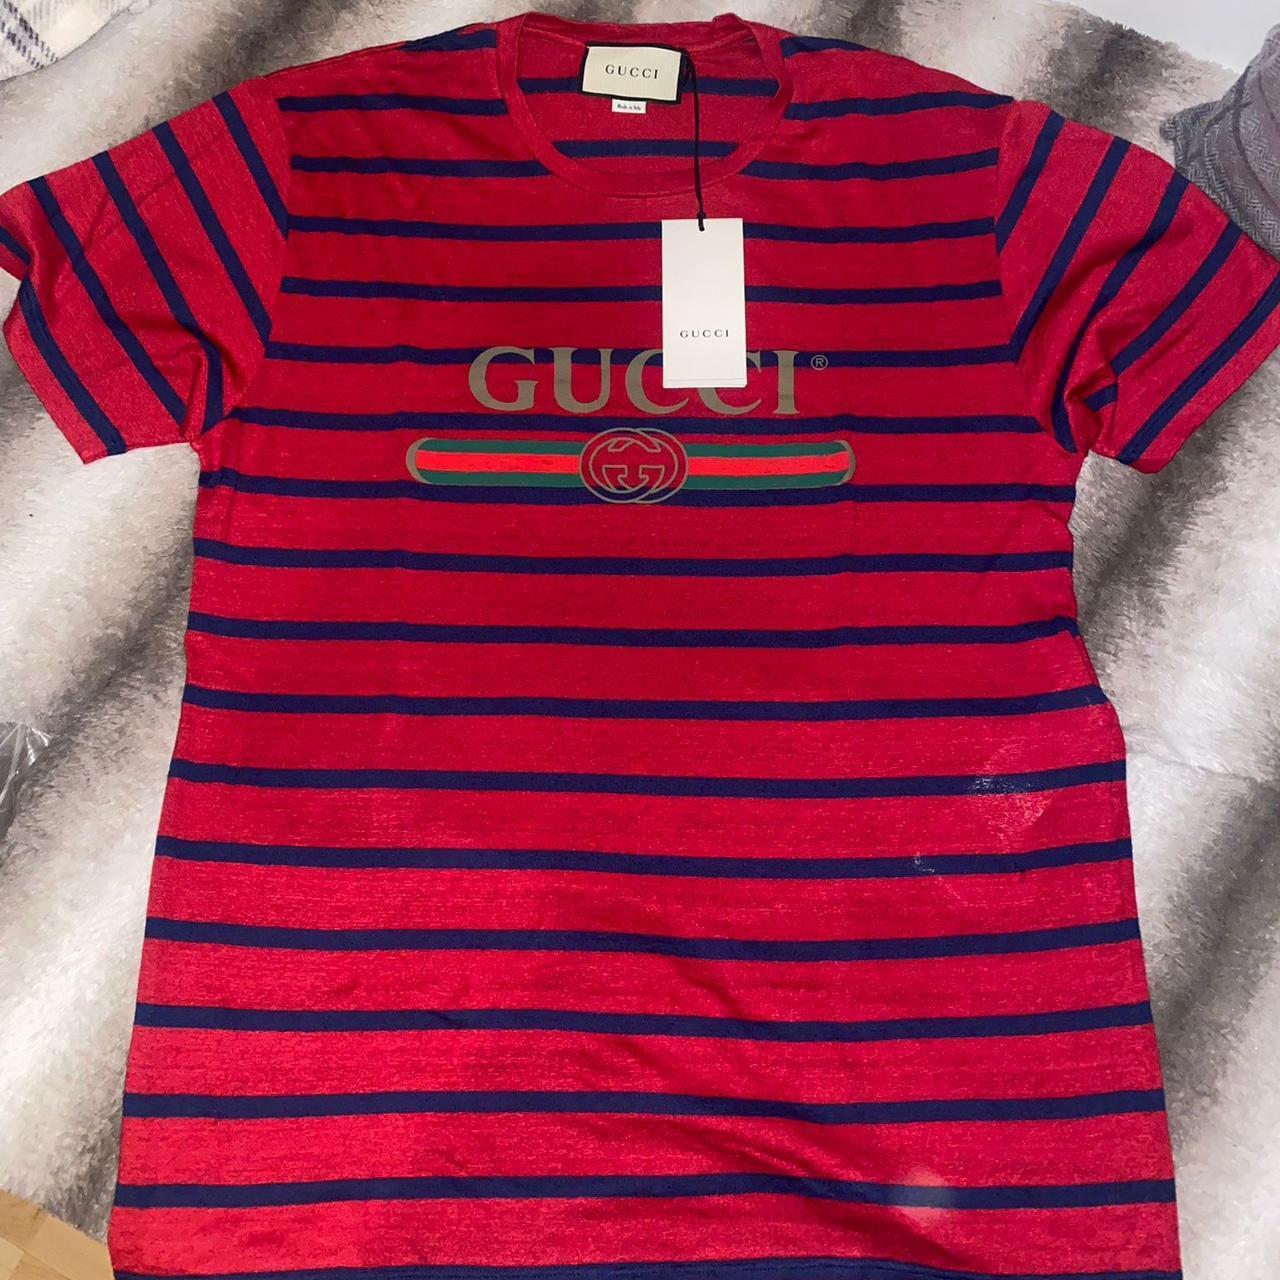 Gucci t shirt Red striped detail New with tags Open... - Depop